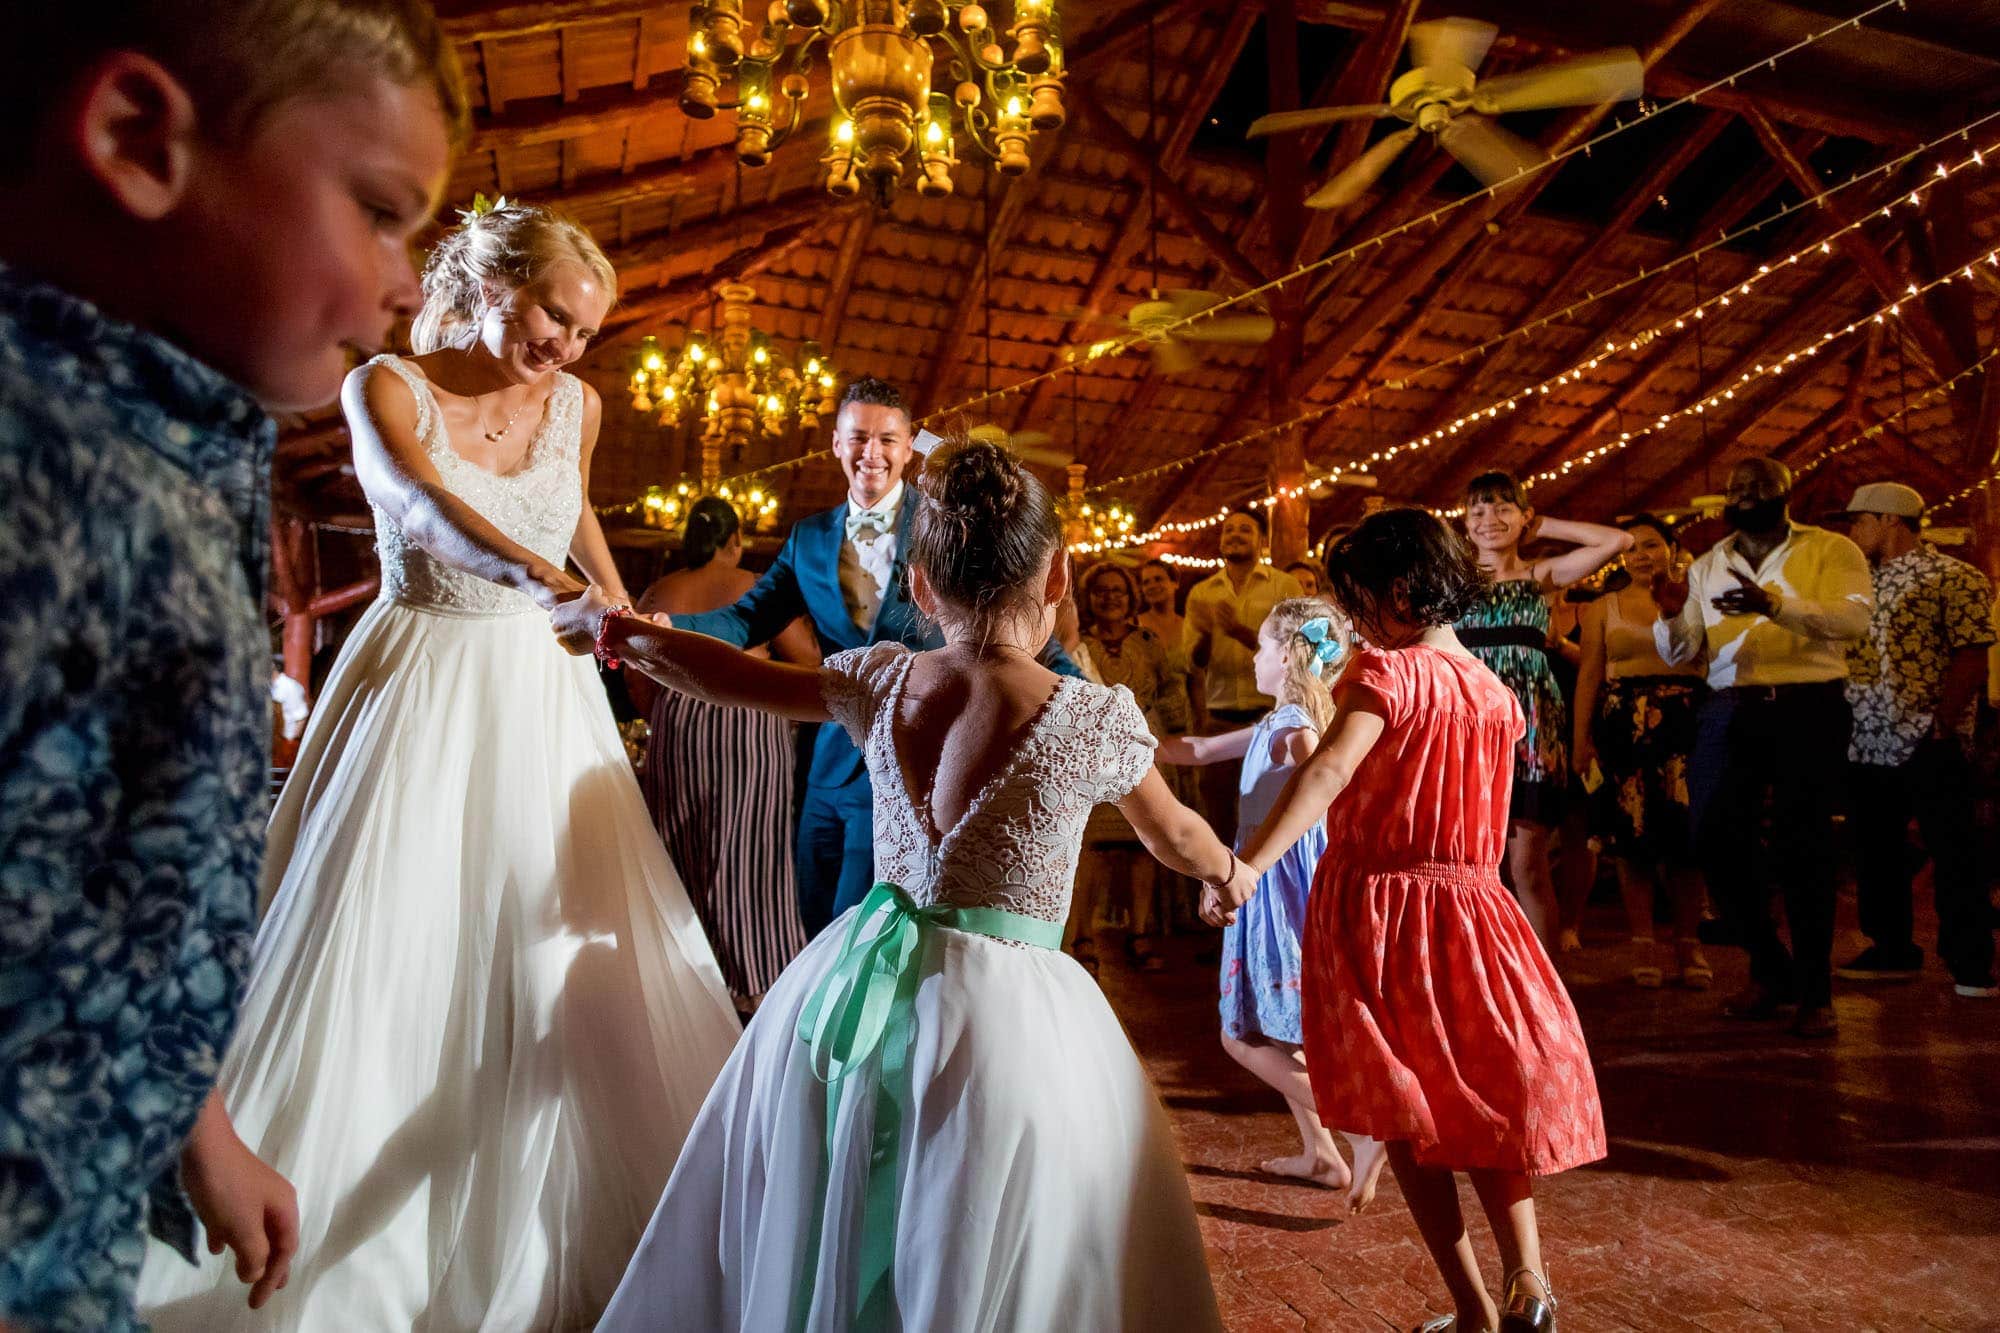 The bride and groom dancing with the kids after the church wedding ceremony